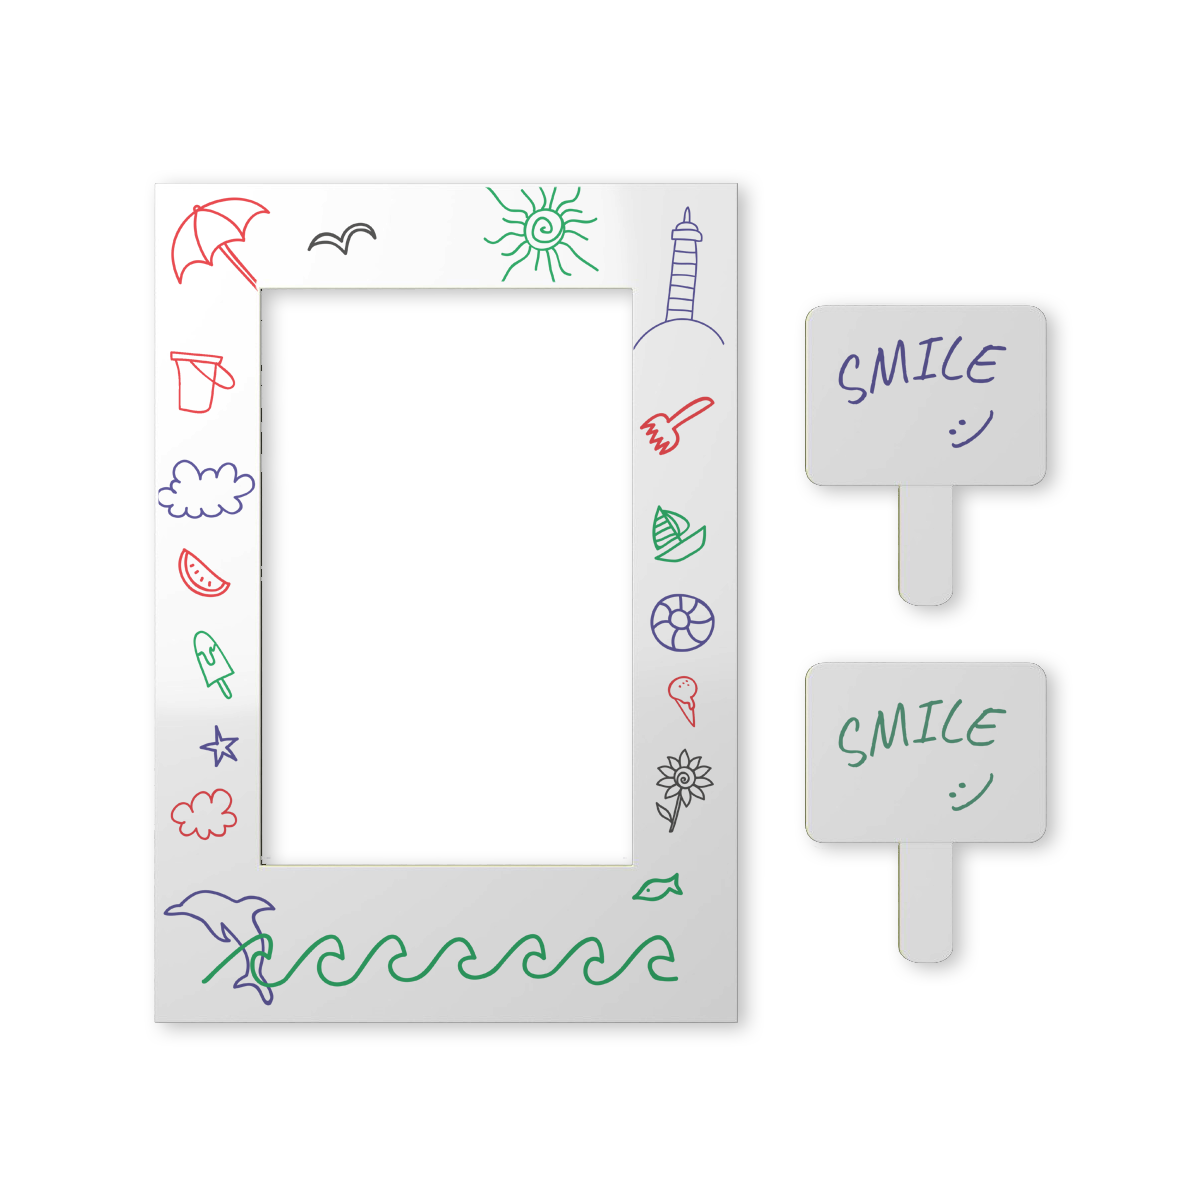 Dry erase photo frame for taking pictures + 2 photo plates